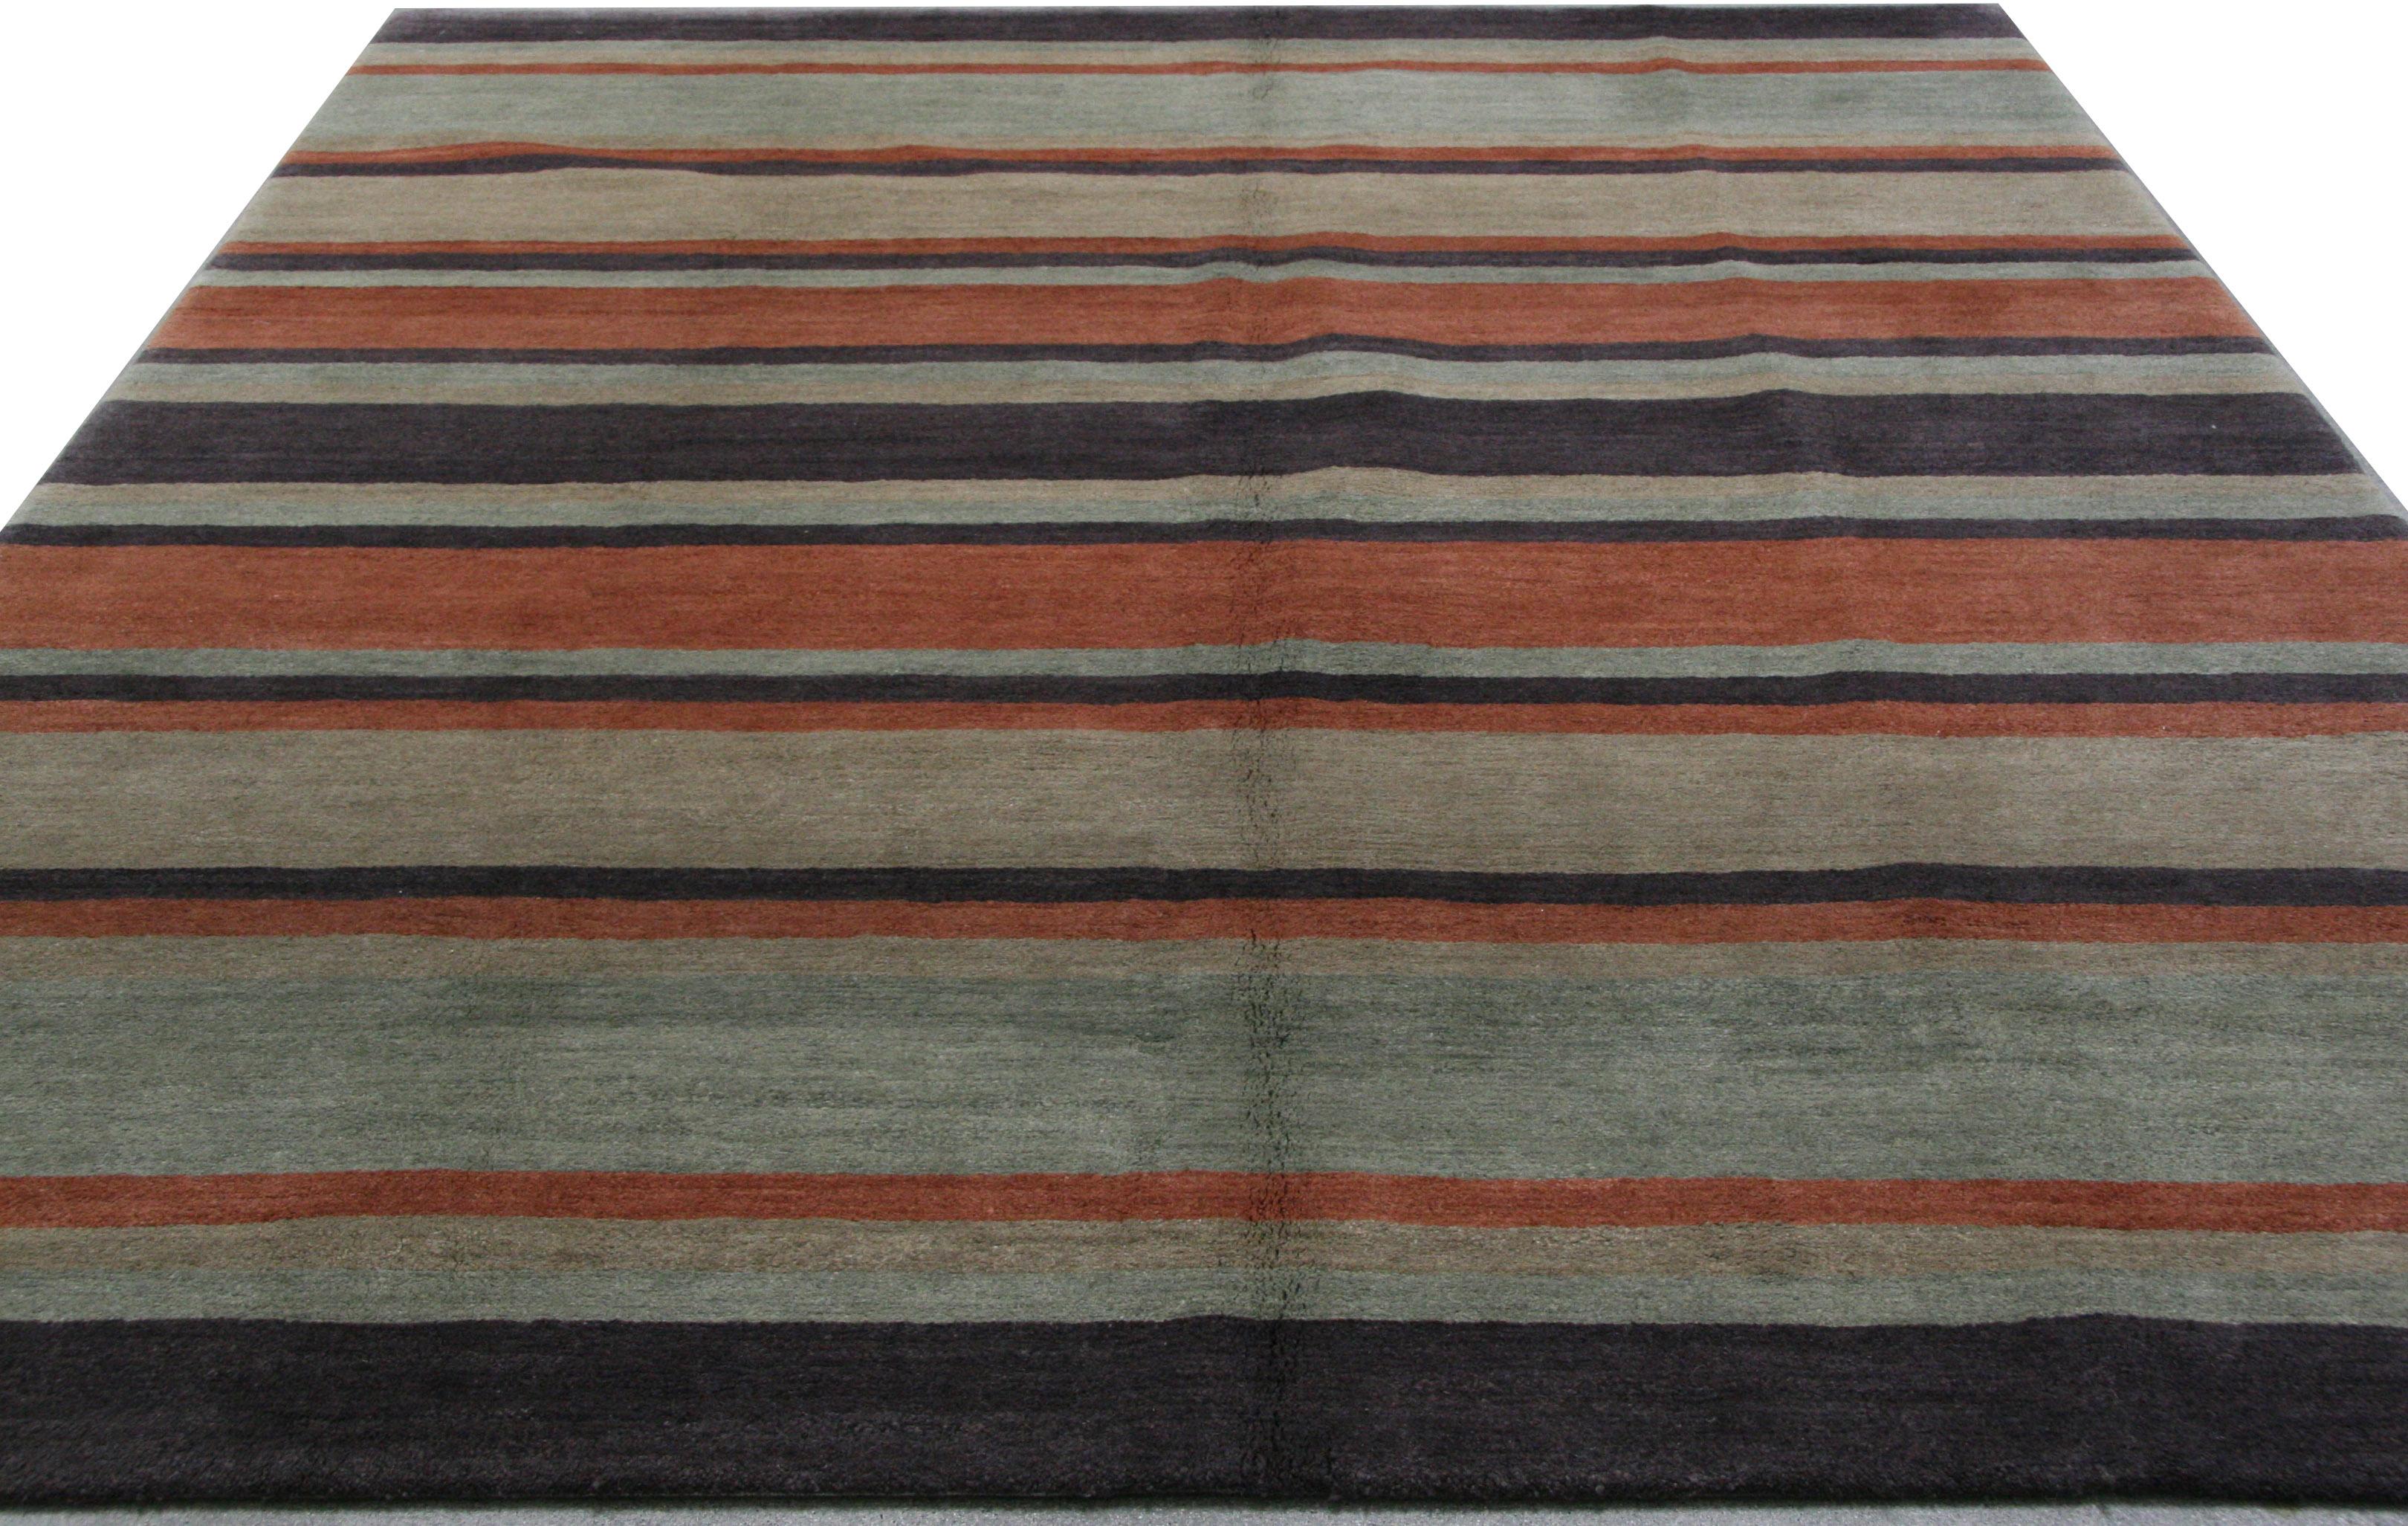 Charcoal stripe rug
Colors: Charcoal, rust, gold and beige.